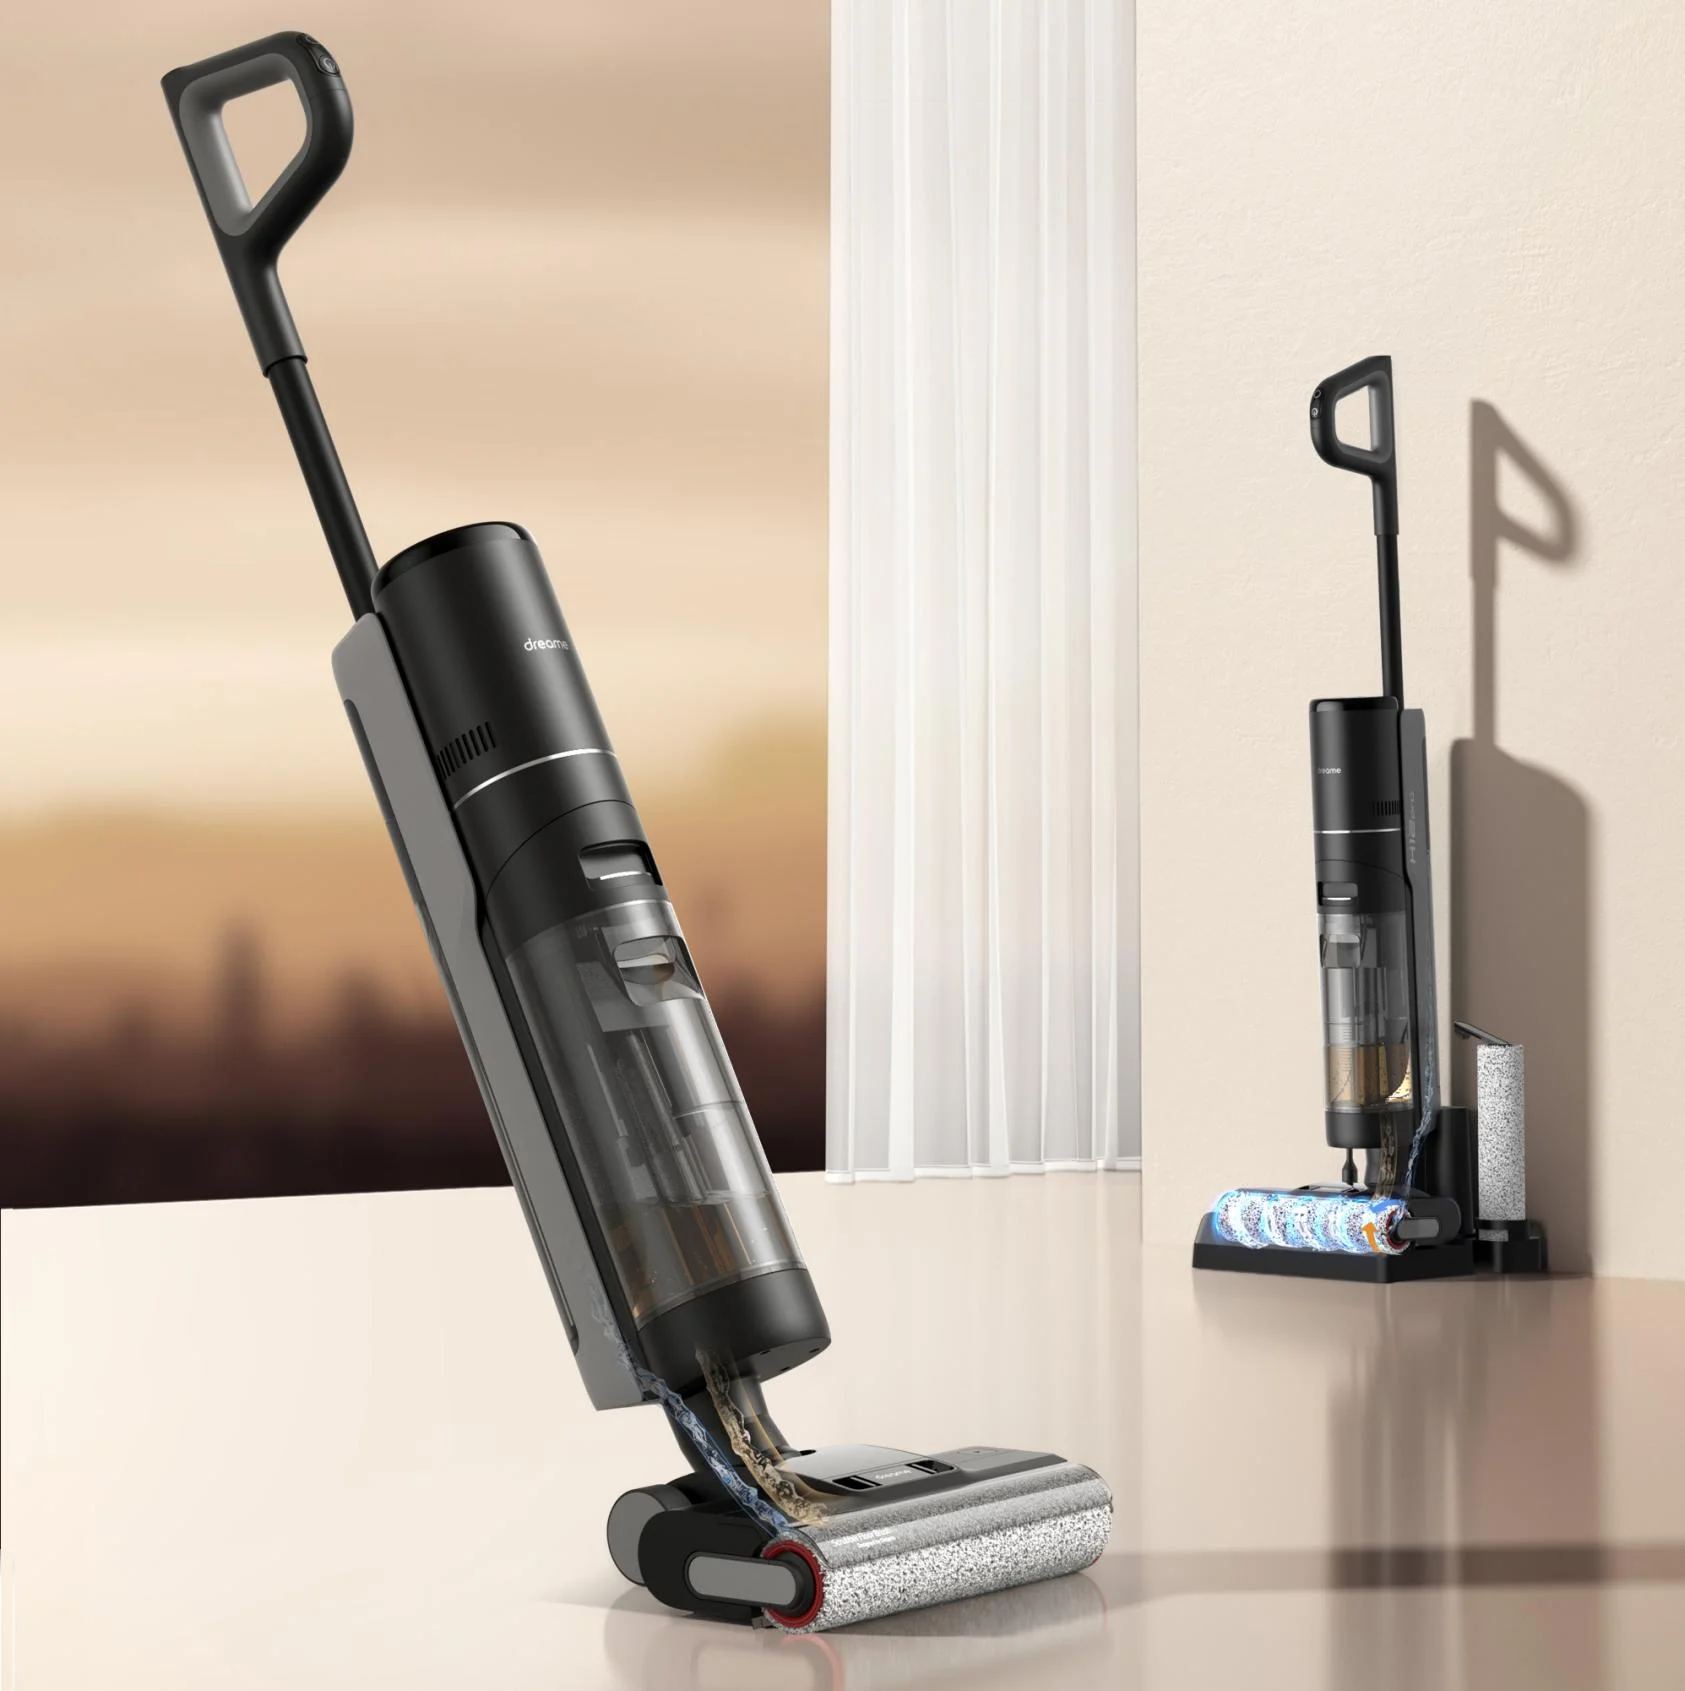 DREAME H12 Pro Wet and Dry Cordless Vacuum Cleaner Smart Floor